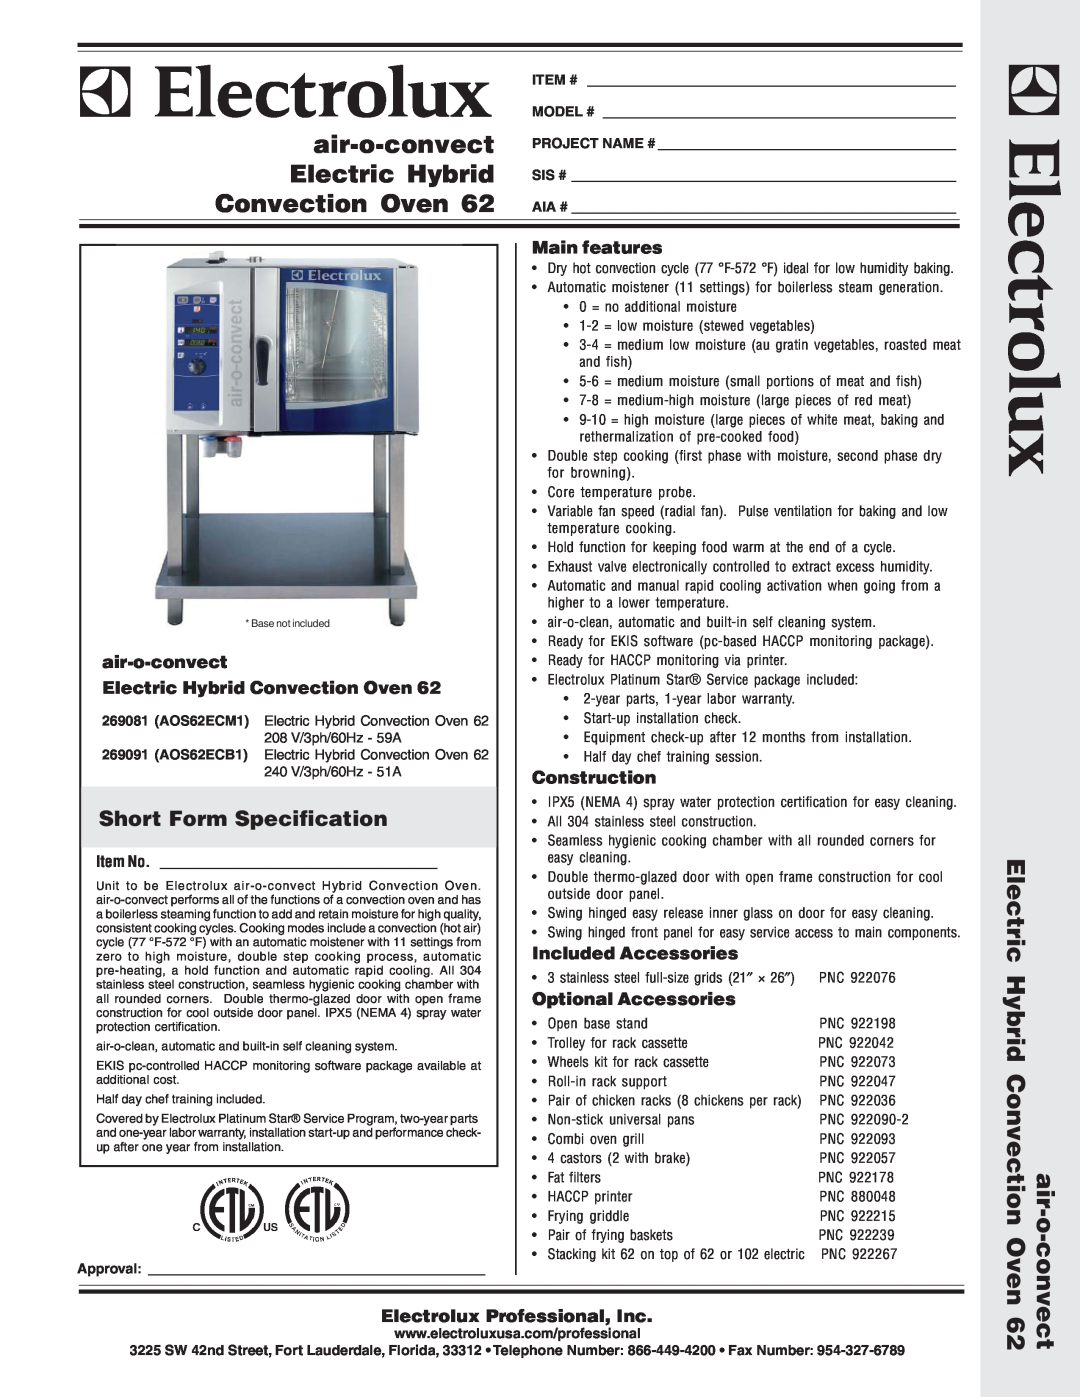 Electrolux AOS62ECB1 warranty Short Form Specification, air-o-convect Electric Hybrid Convection Oven, Main features 